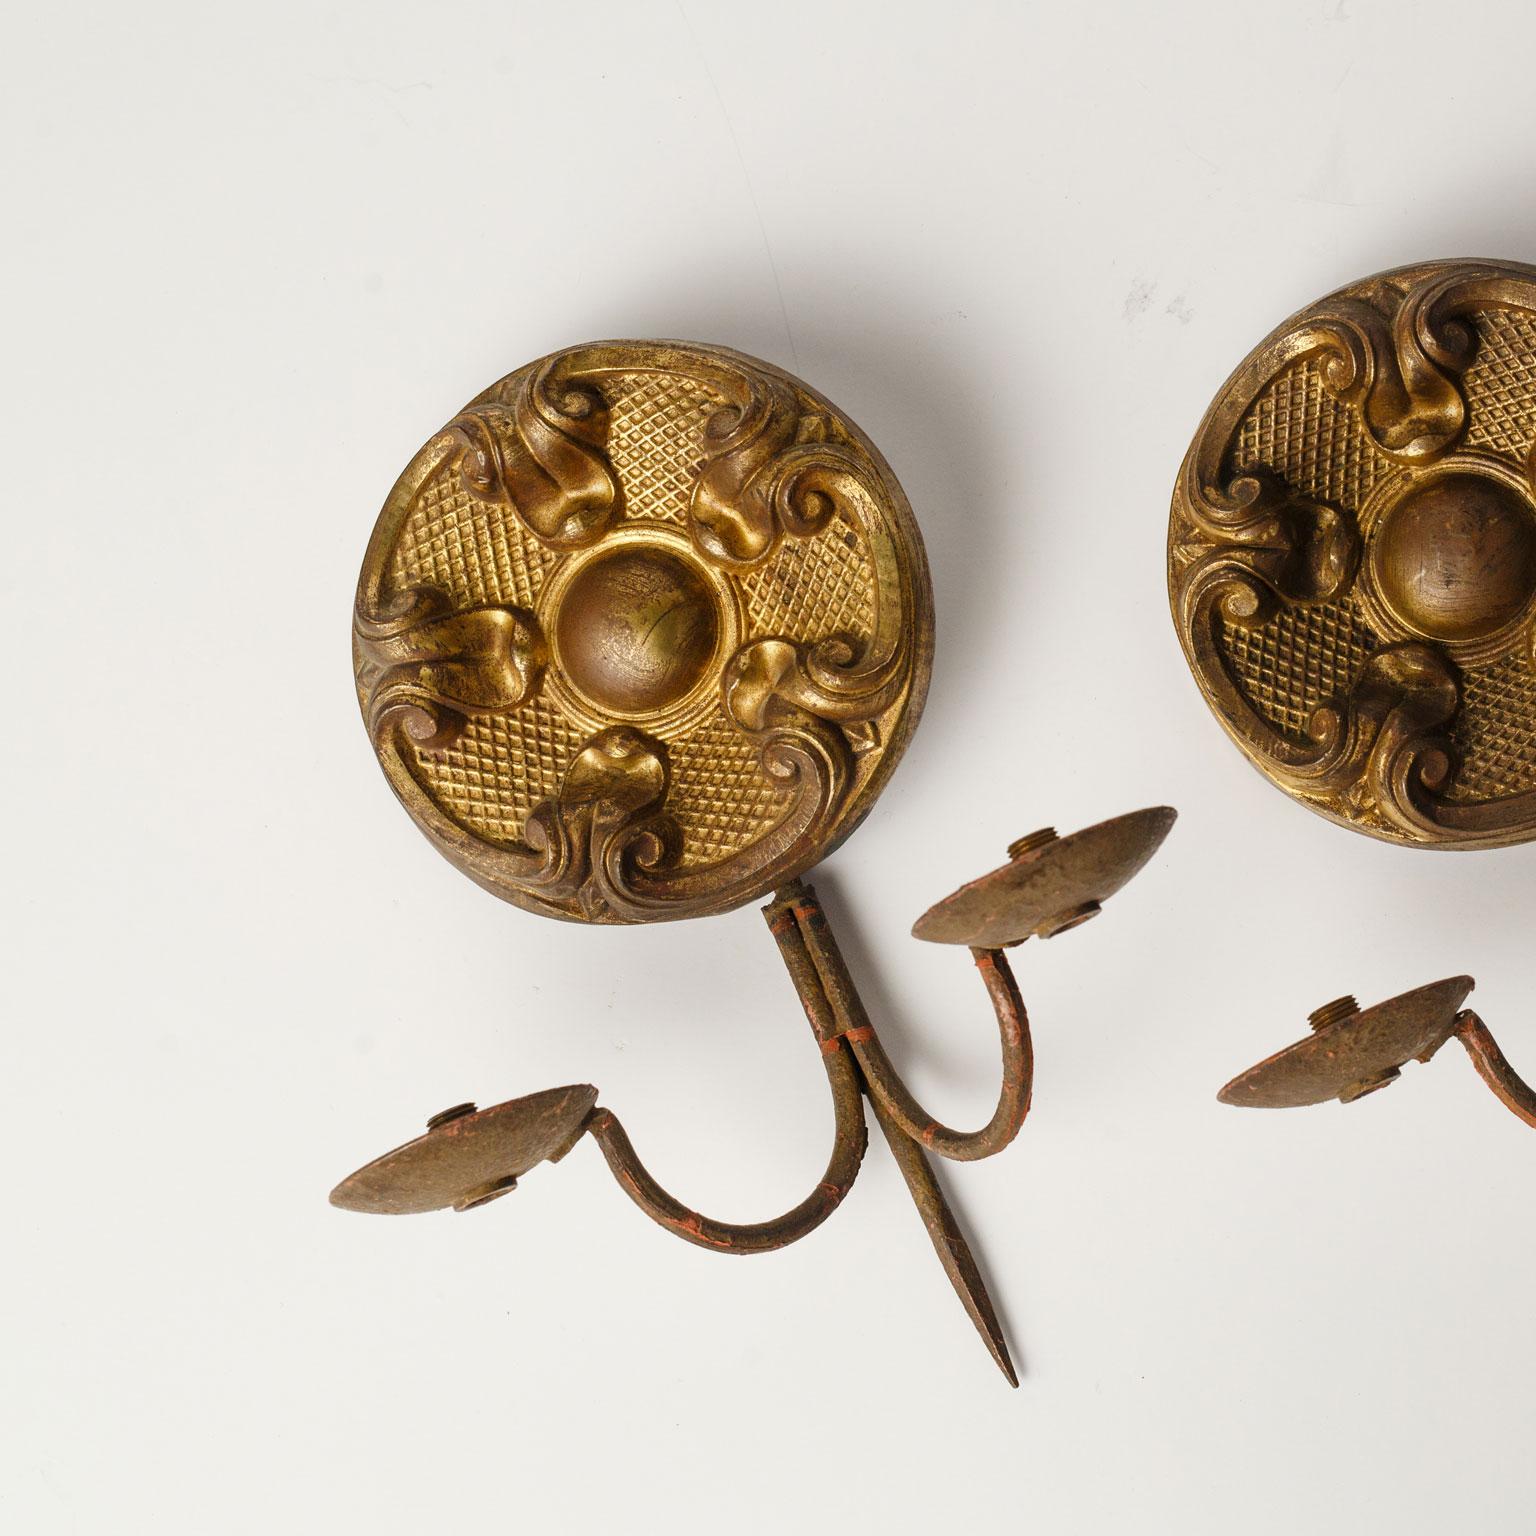 Pair of repousse sconces with two iron arms each. Remnants of gilt decorate surface of the brass repousse. Dating to the mid-late 19th century. Unwired, but can be wired for electricity for an additional cost. Sold together as a pair for $850.